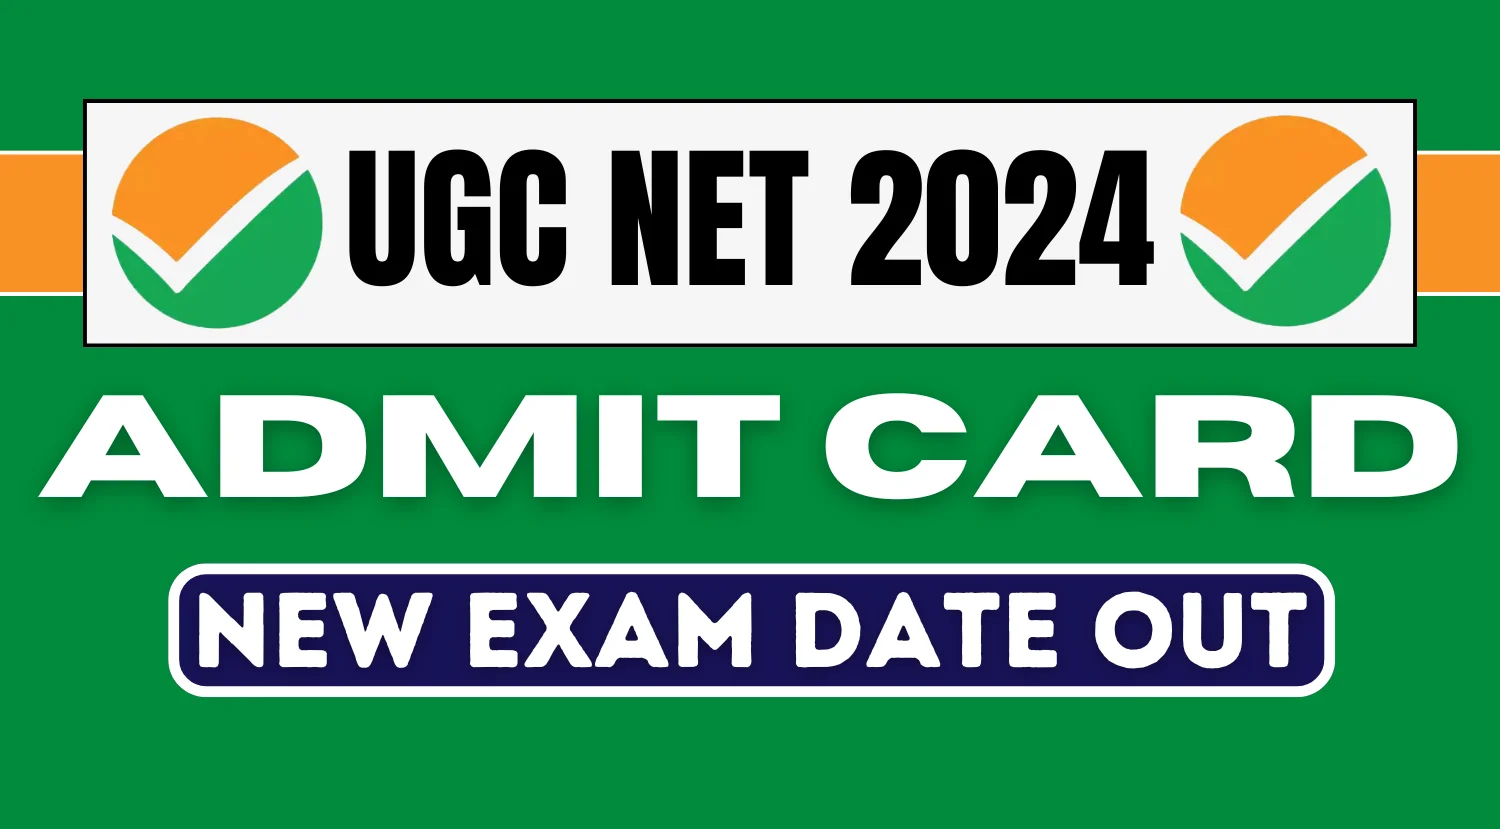 UGC NET Admit card 2024, New Exam Date Out, Check Official Notification